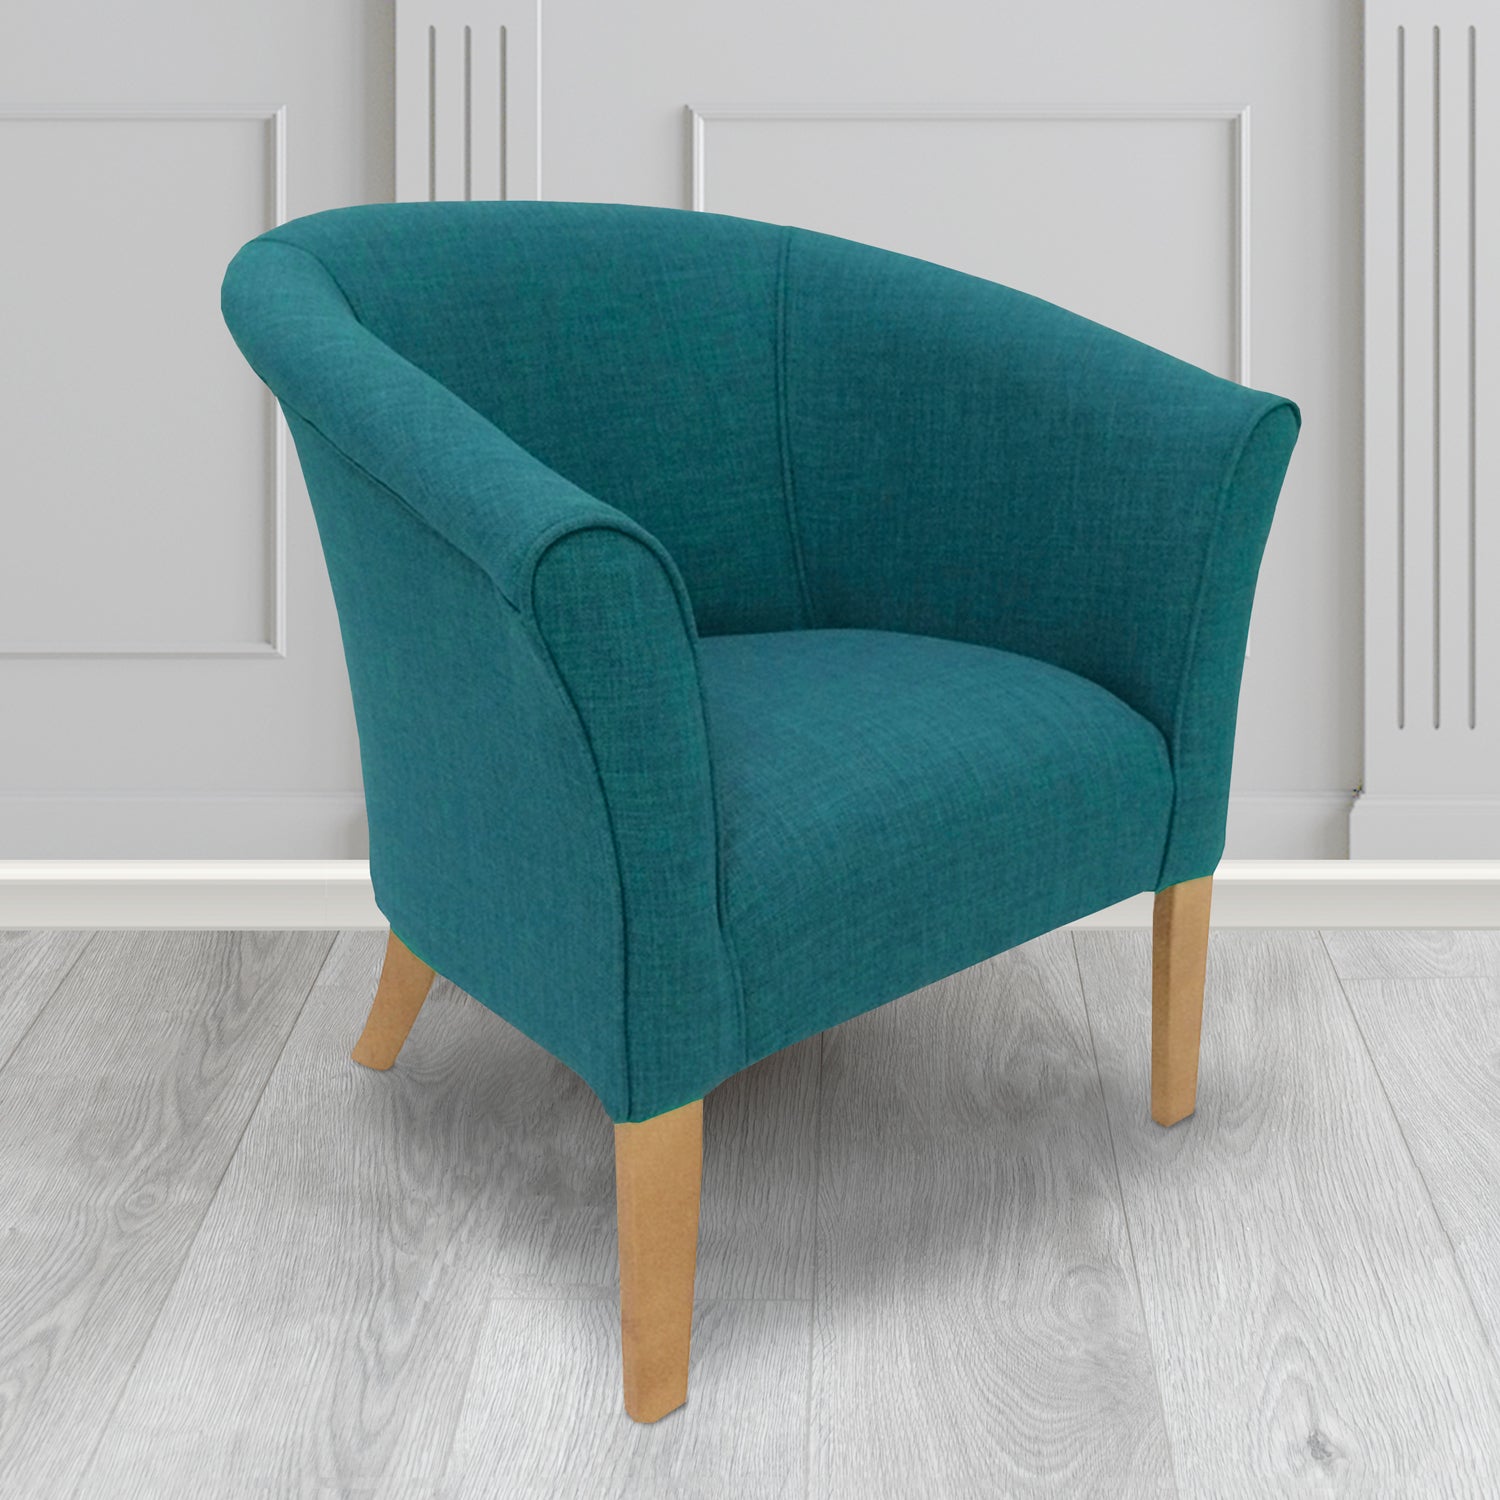 Quill Tub Chair in Linetta Teal Crib 5 Plain Fabric - Antimicrobial, Stain Resistant & Waterproof - The Tub Chair Shop